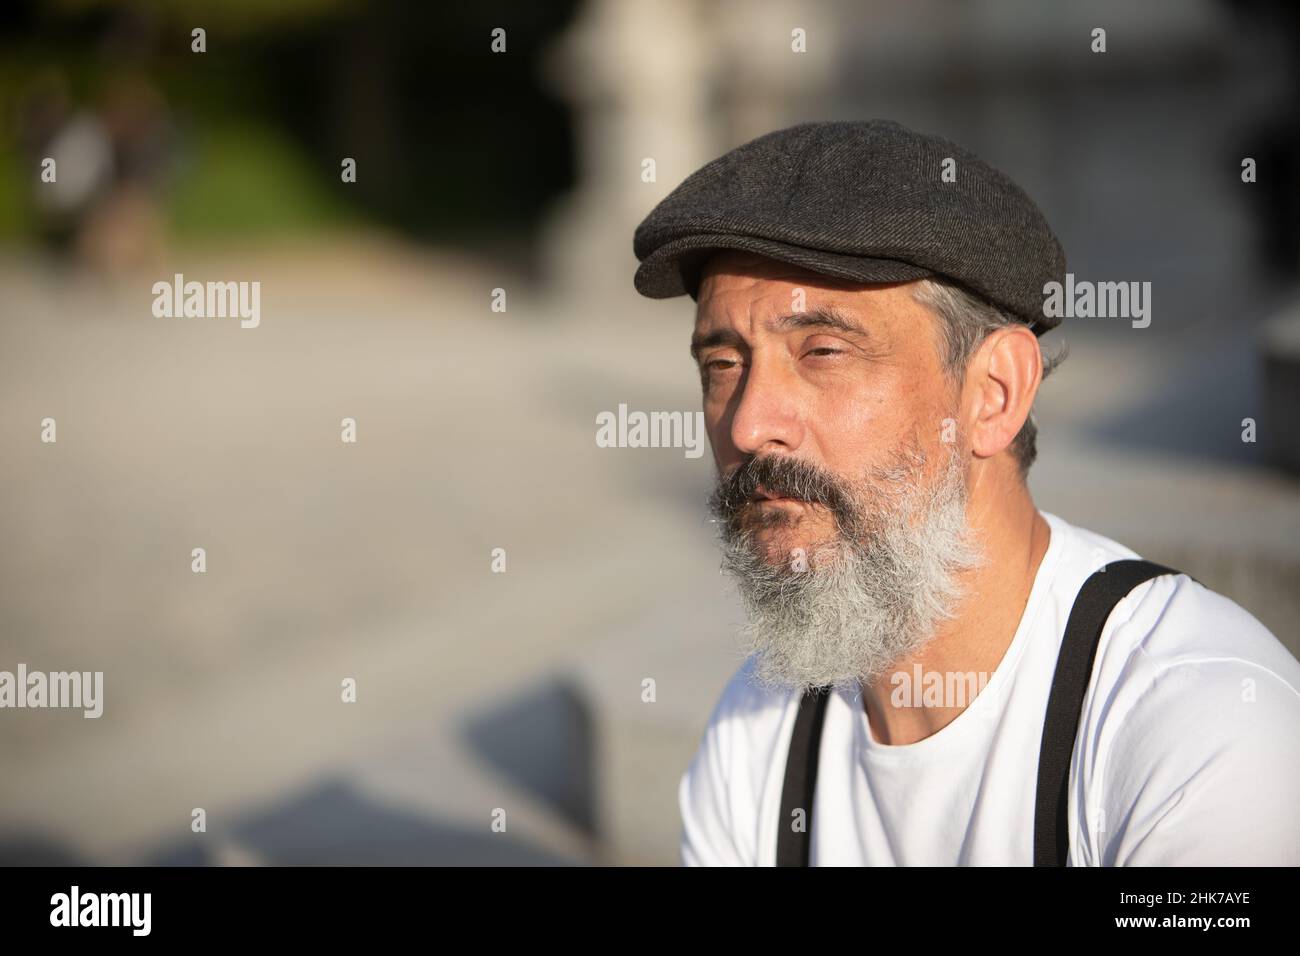 portrait of Older man with beret and gray beard sitting in a plaza Stock Photo